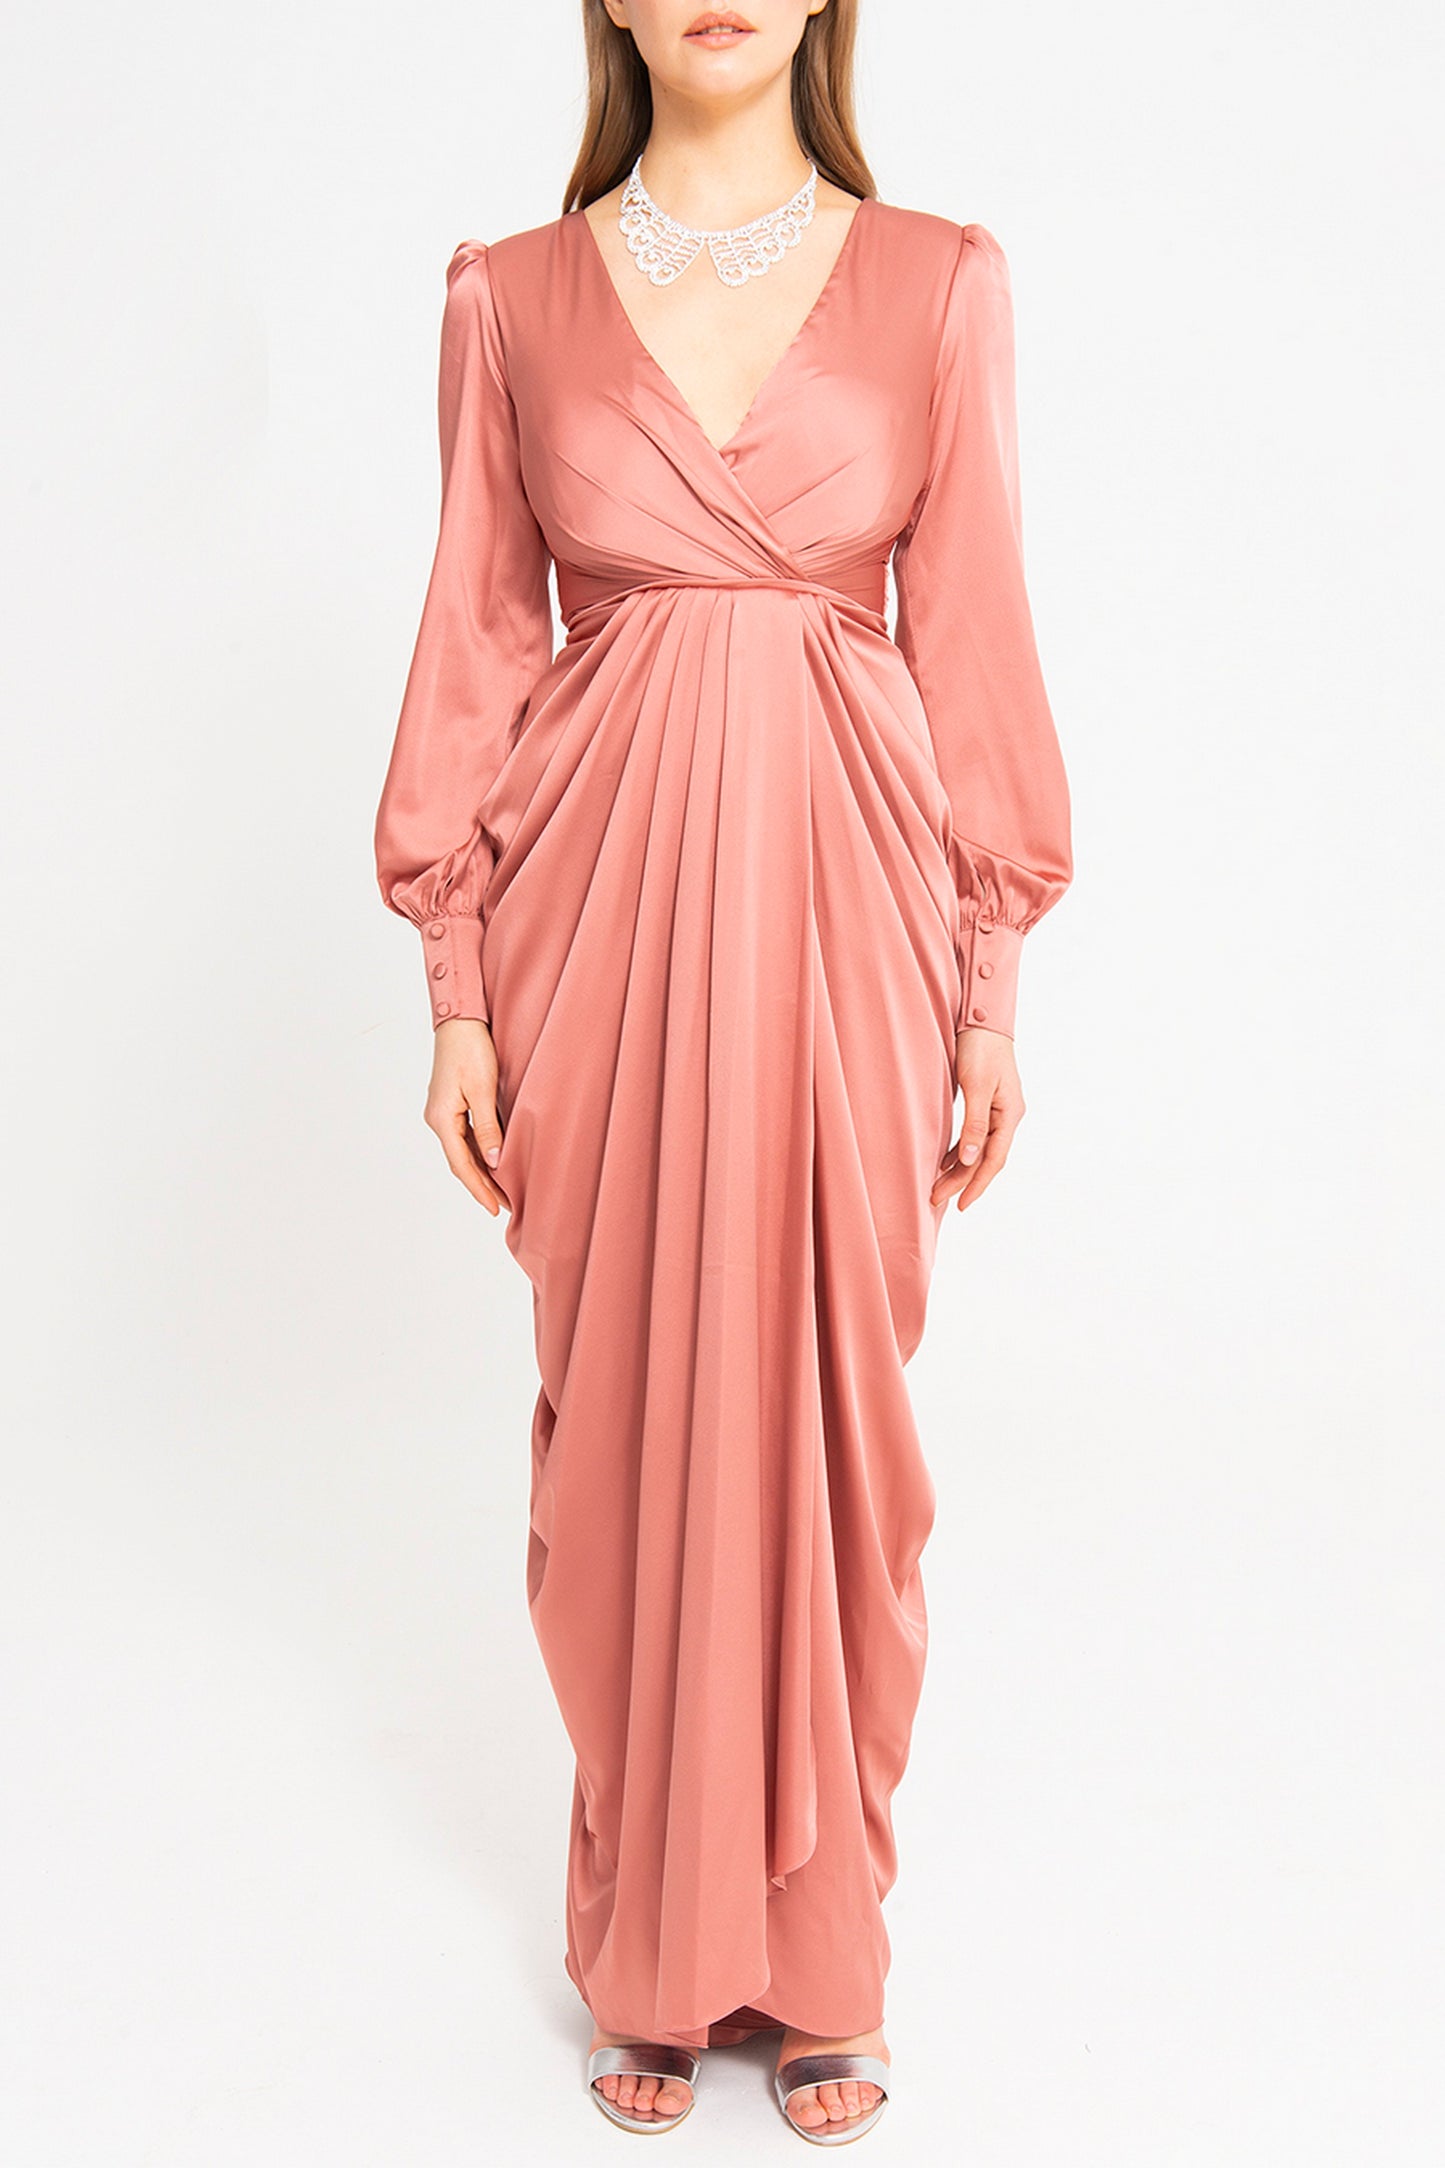 Veronica - Mystic Evenings | Evening and Prom Dresses